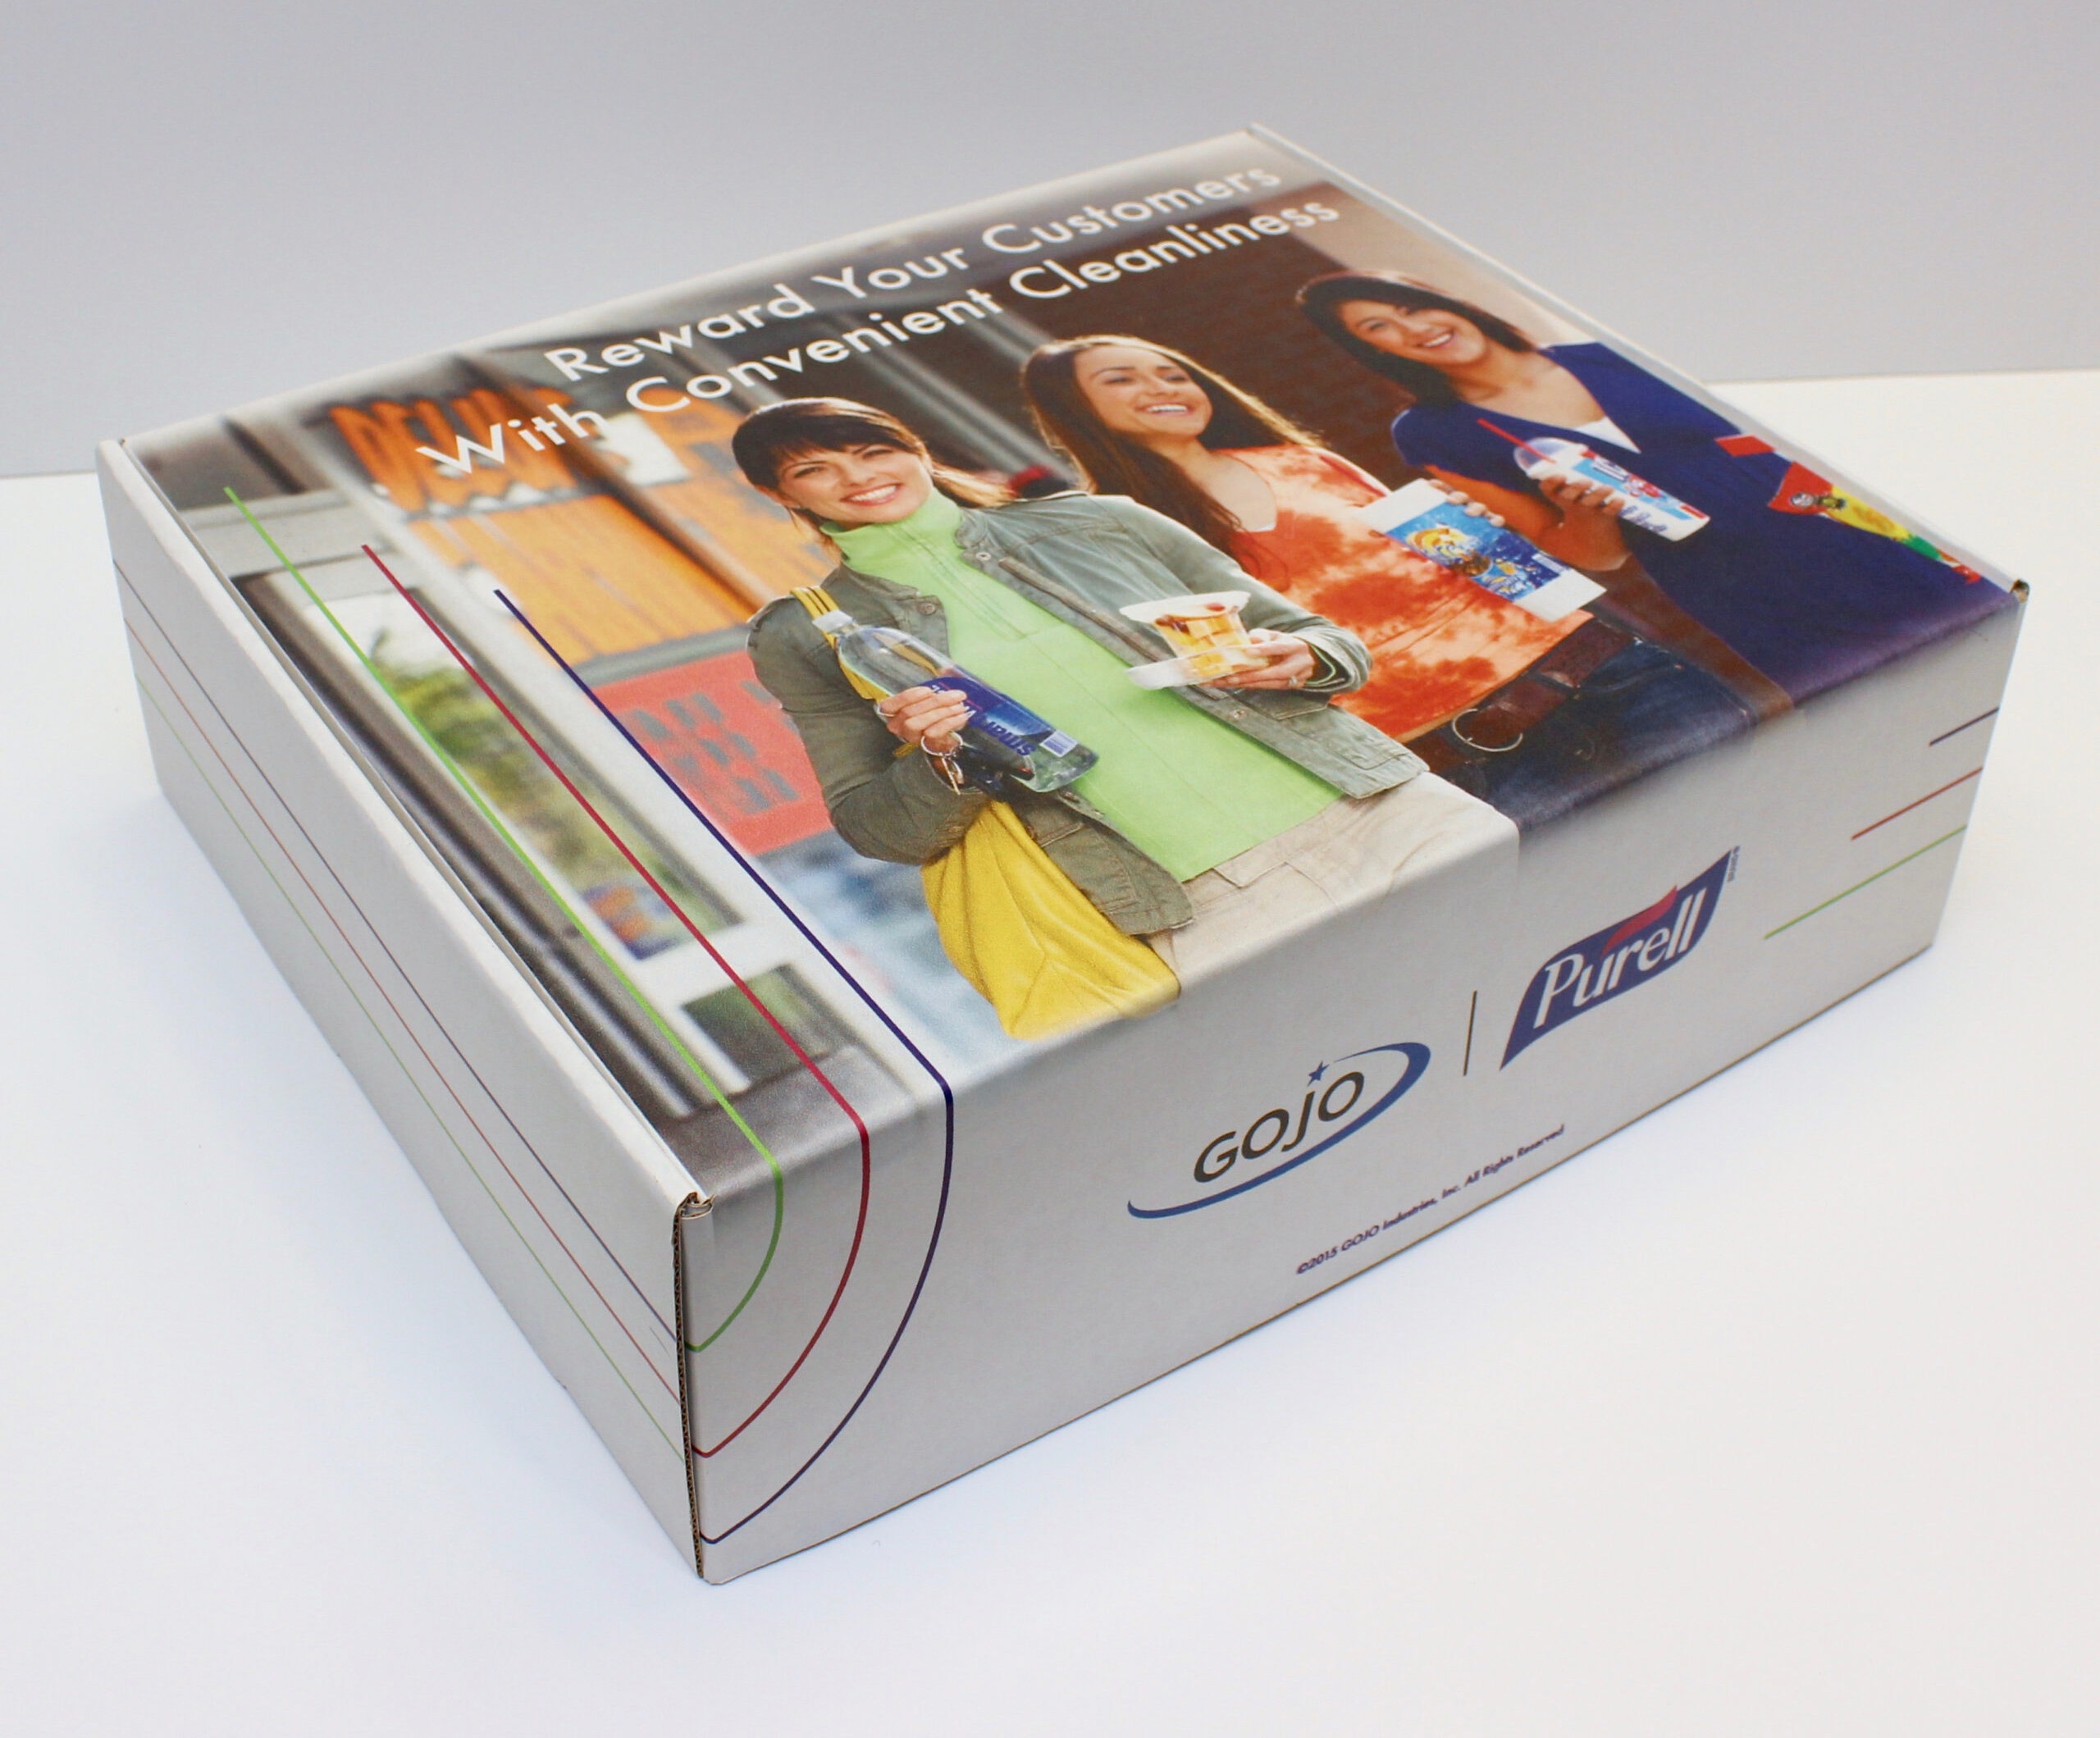 Promotional engineered box with inserts designed to organize the hand sanitizer and hand soap that was placed inside.